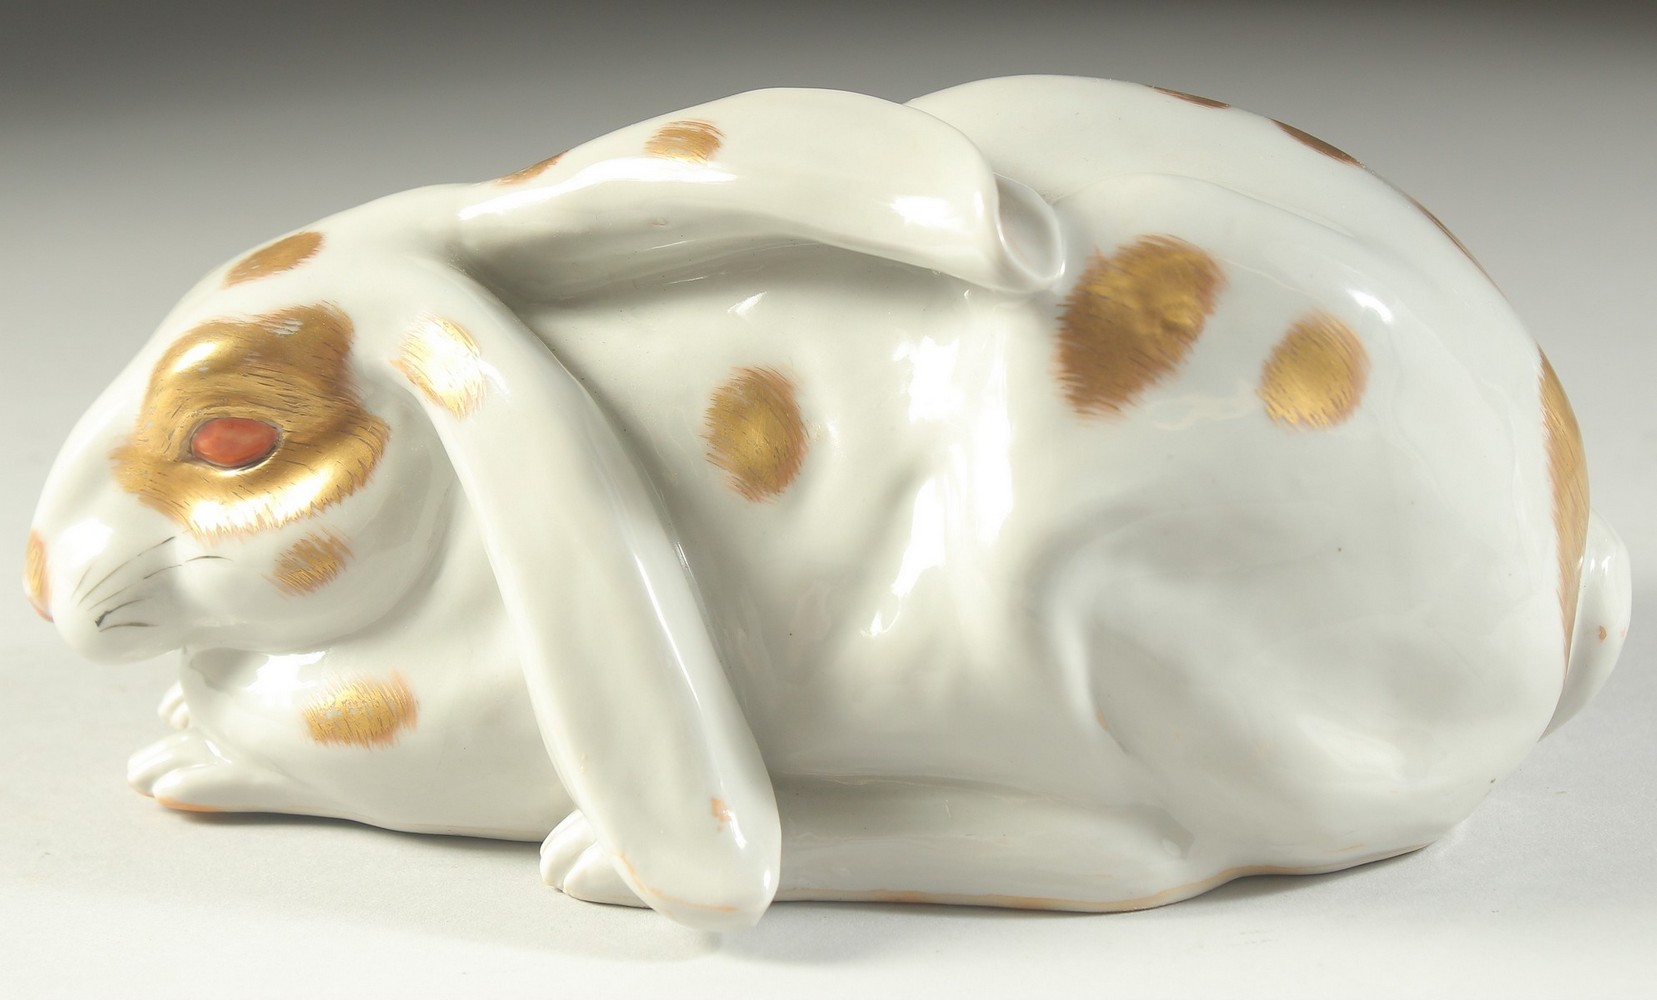 A JAPANESE KUTANI PORCELAIN HARE, with gilded patches and painted red eyes, made in Japan mark, 22cm - Image 3 of 5